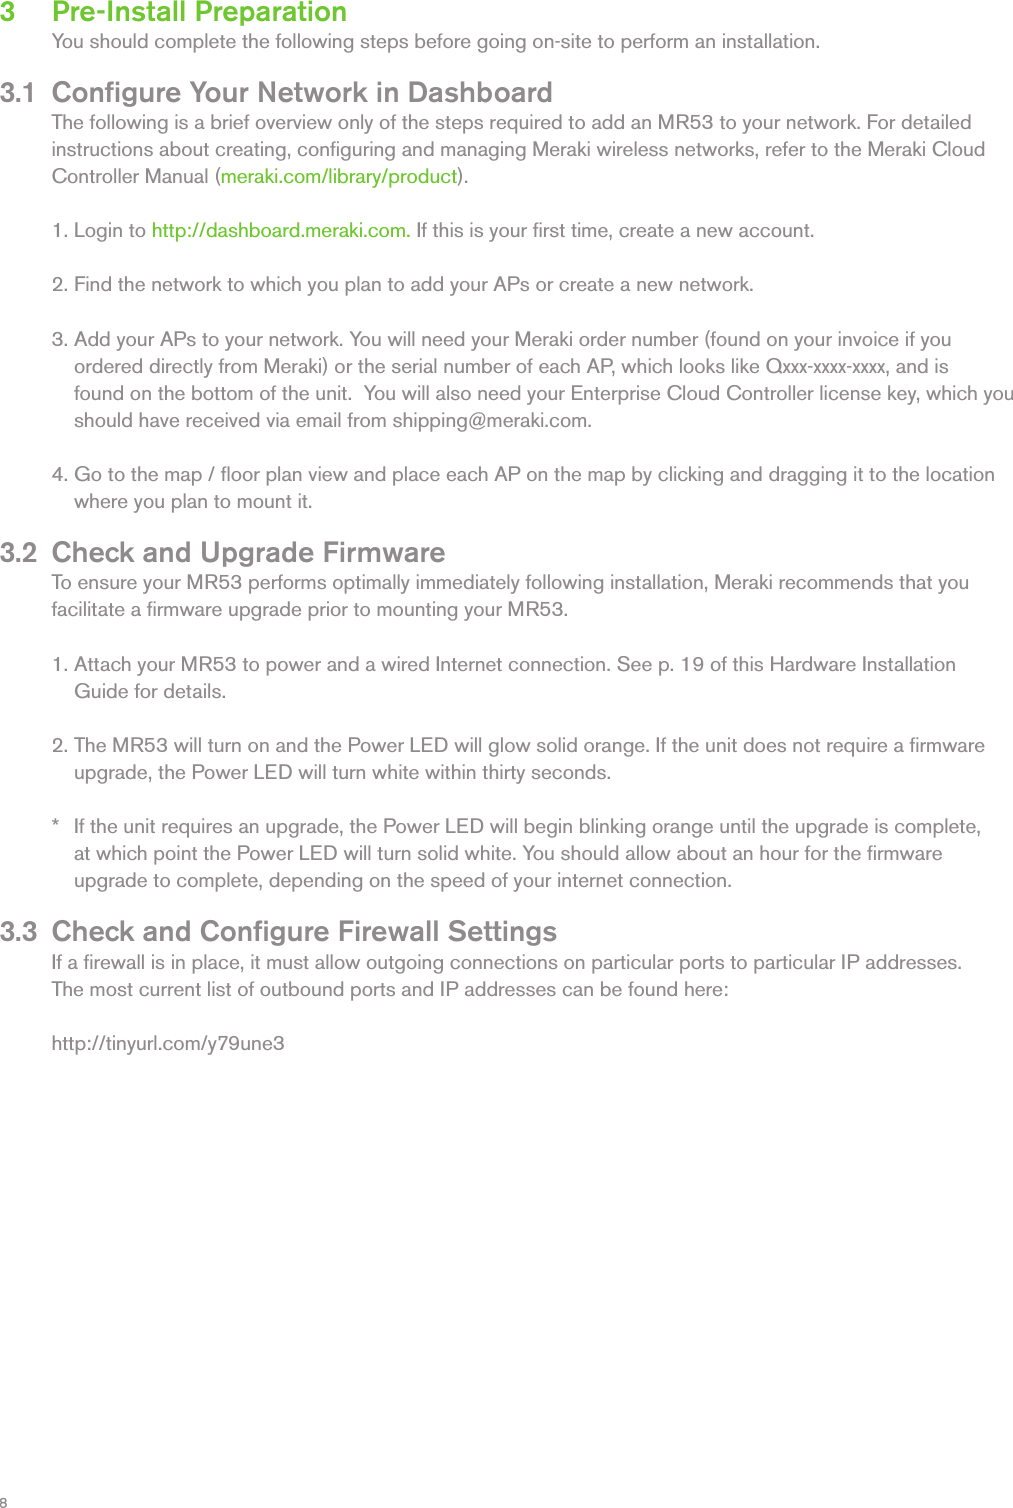 83   Pre-Install Preparation  You should complete the following steps before going on-site to perform an installation. 3.1  Conﬁgure Your Network in Dashboard  The following is a brief overview only of the steps required to add an MR53 to your network. For detailed   instructions about creating, conﬁguring and managing Meraki wireless networks, refer to the Meraki Cloud   Controller Manual (meraki.com/library/product).   1. Login to http://dashboard.meraki.com. If this is your ﬁrst time, create a new account.   2. Find the network to which you plan to add your APs or create a new network.    3. Add your APs to your network. You will need your Meraki order number (found on your invoice if you      ordered directly from Meraki) or the serial number of each AP, which looks like Qxxx-xxxx-xxxx, and is      found on the bottom of the unit.  You will also need your Enterprise Cloud Controller license key, which you        should have received via email from shipping@meraki.com.   4. Go to the map / ﬂoor plan view and place each AP on the map by clicking and dragging it to the location        where you plan to mount it. 3.2  Check and Upgrade Firmware  To ensure your MR53 performs optimally immediately following installation, Meraki recommends that you   facilitate a ﬁrmware upgrade prior to mounting your MR53.   1. Attach your MR53 to power and a wired Internet connection. See p. 19 of this Hardware Installation     Guide for details.    2. The MR53 will turn on and the Power LED will glow solid orange. If the unit does not require a ﬁrmware     upgrade, the Power LED will turn white within thirty seconds.     *   If the unit requires an upgrade, the Power LED will begin blinking orange until the upgrade is complete,      at which point the Power LED will turn solid white. You should allow about an hour for the ﬁrmware      upgrade to complete, depending on the speed of your internet connection. 3.3  Check and Conﬁgure Firewall Settings  If a ﬁrewall is in place, it must allow outgoing connections on particular ports to particular IP addresses.     The most current list of outbound ports and IP addresses can be found here:  http://tinyurl.com/y79une3 